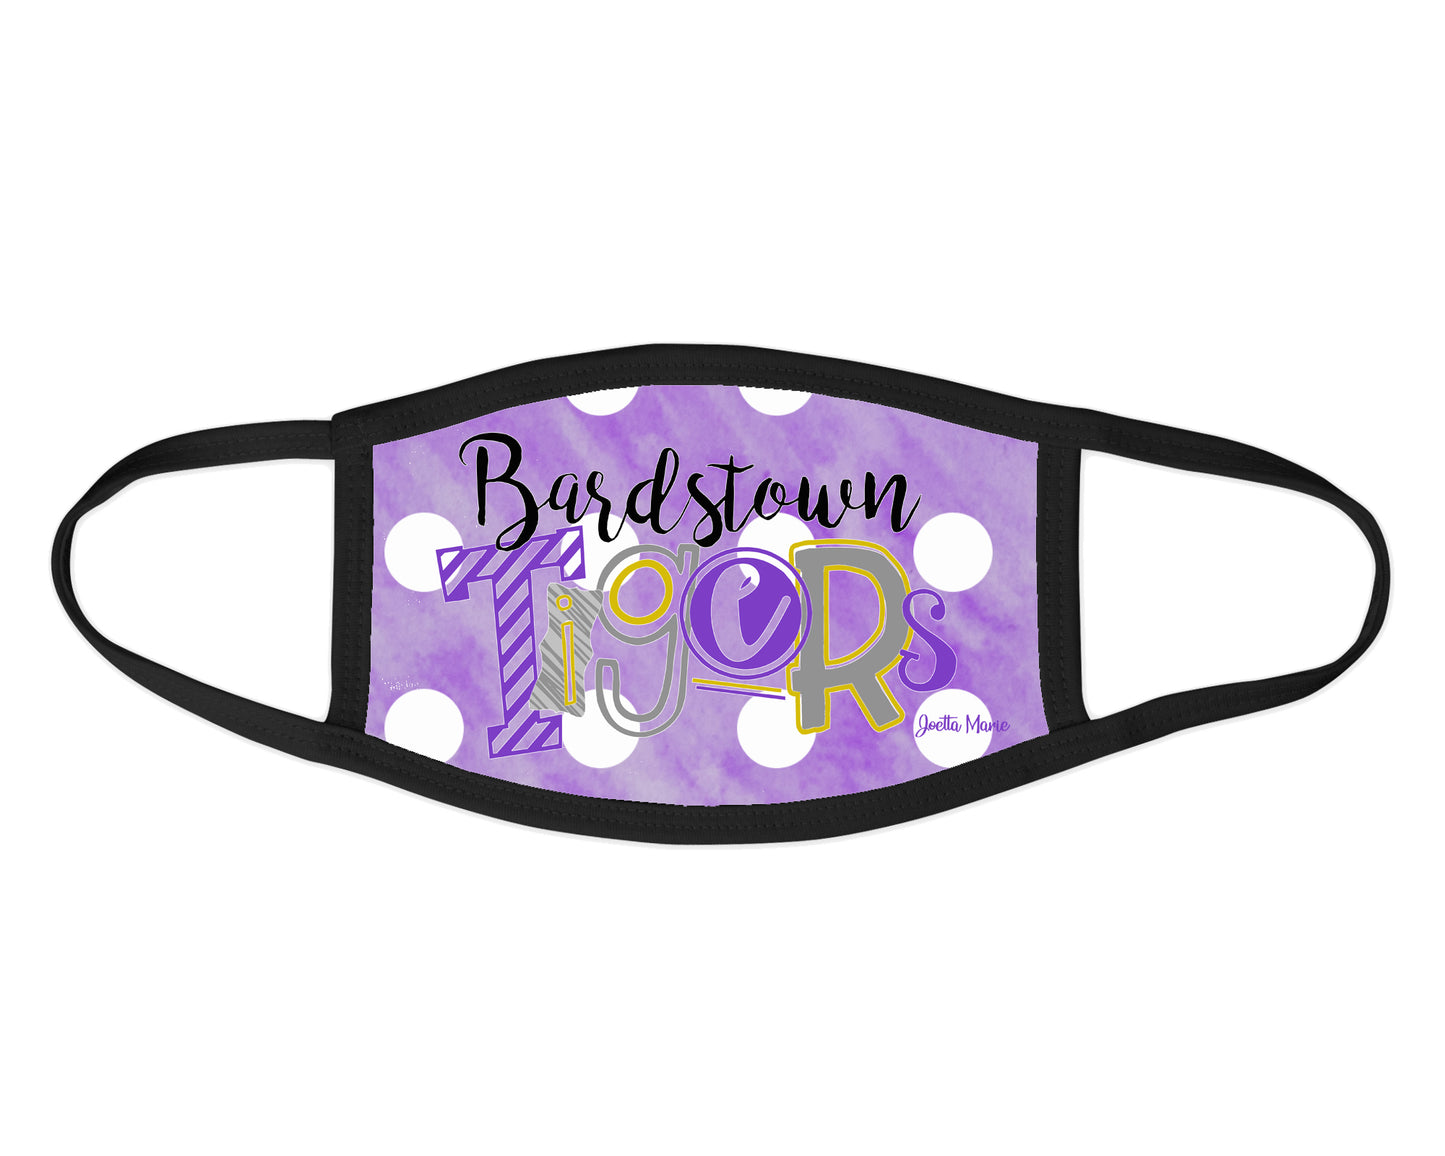 Bardstown Tigers Face Mask